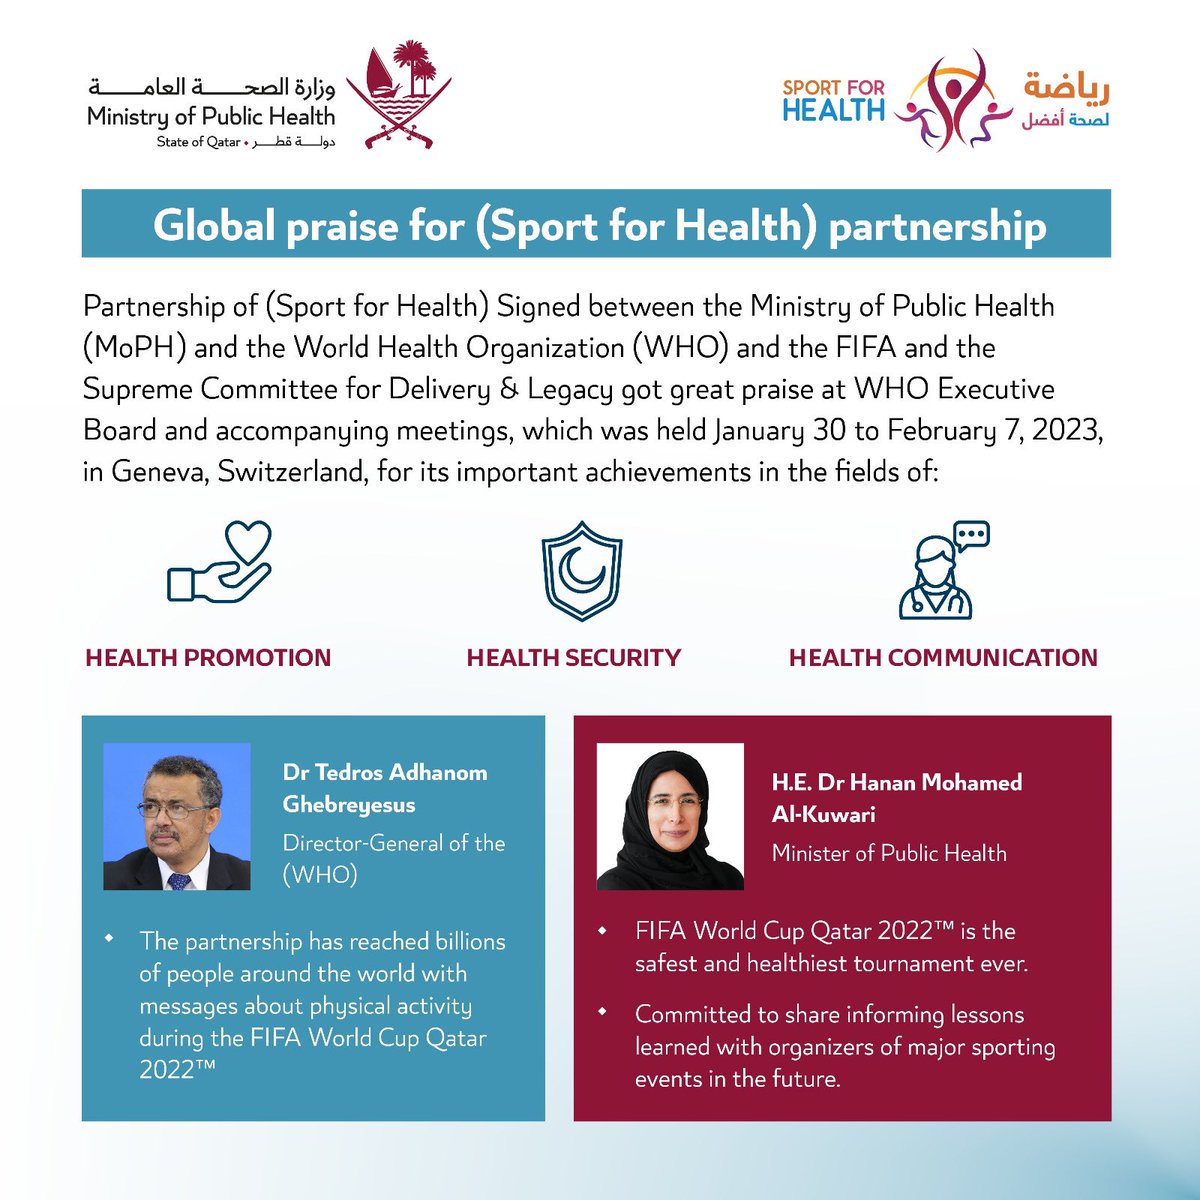 Global praise for “Sport for Health” partnership for its important achievements in the fields of health promotion, health security and health communication.
#Sport4Health